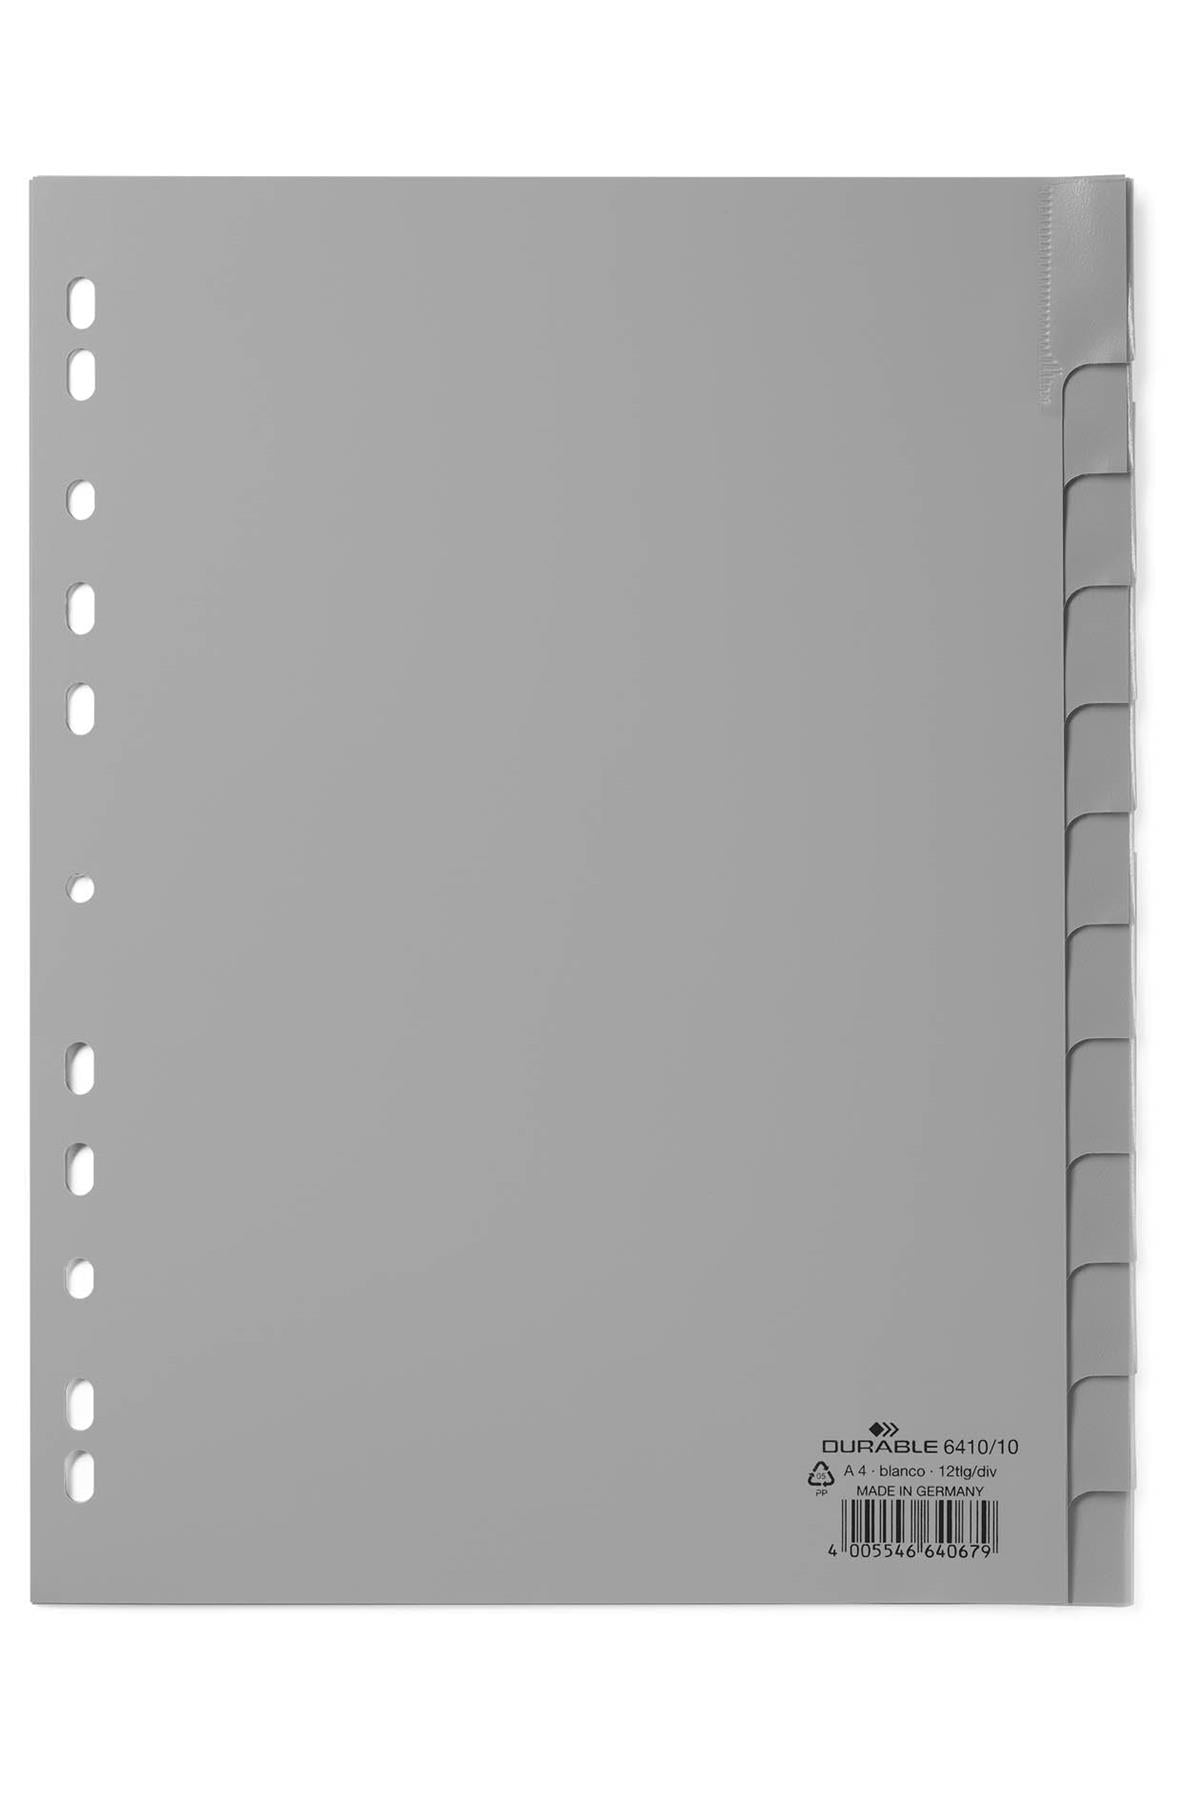 Durable 12 Part Removable Tab Reinforced Punched Index Dividers | A4 | Grey